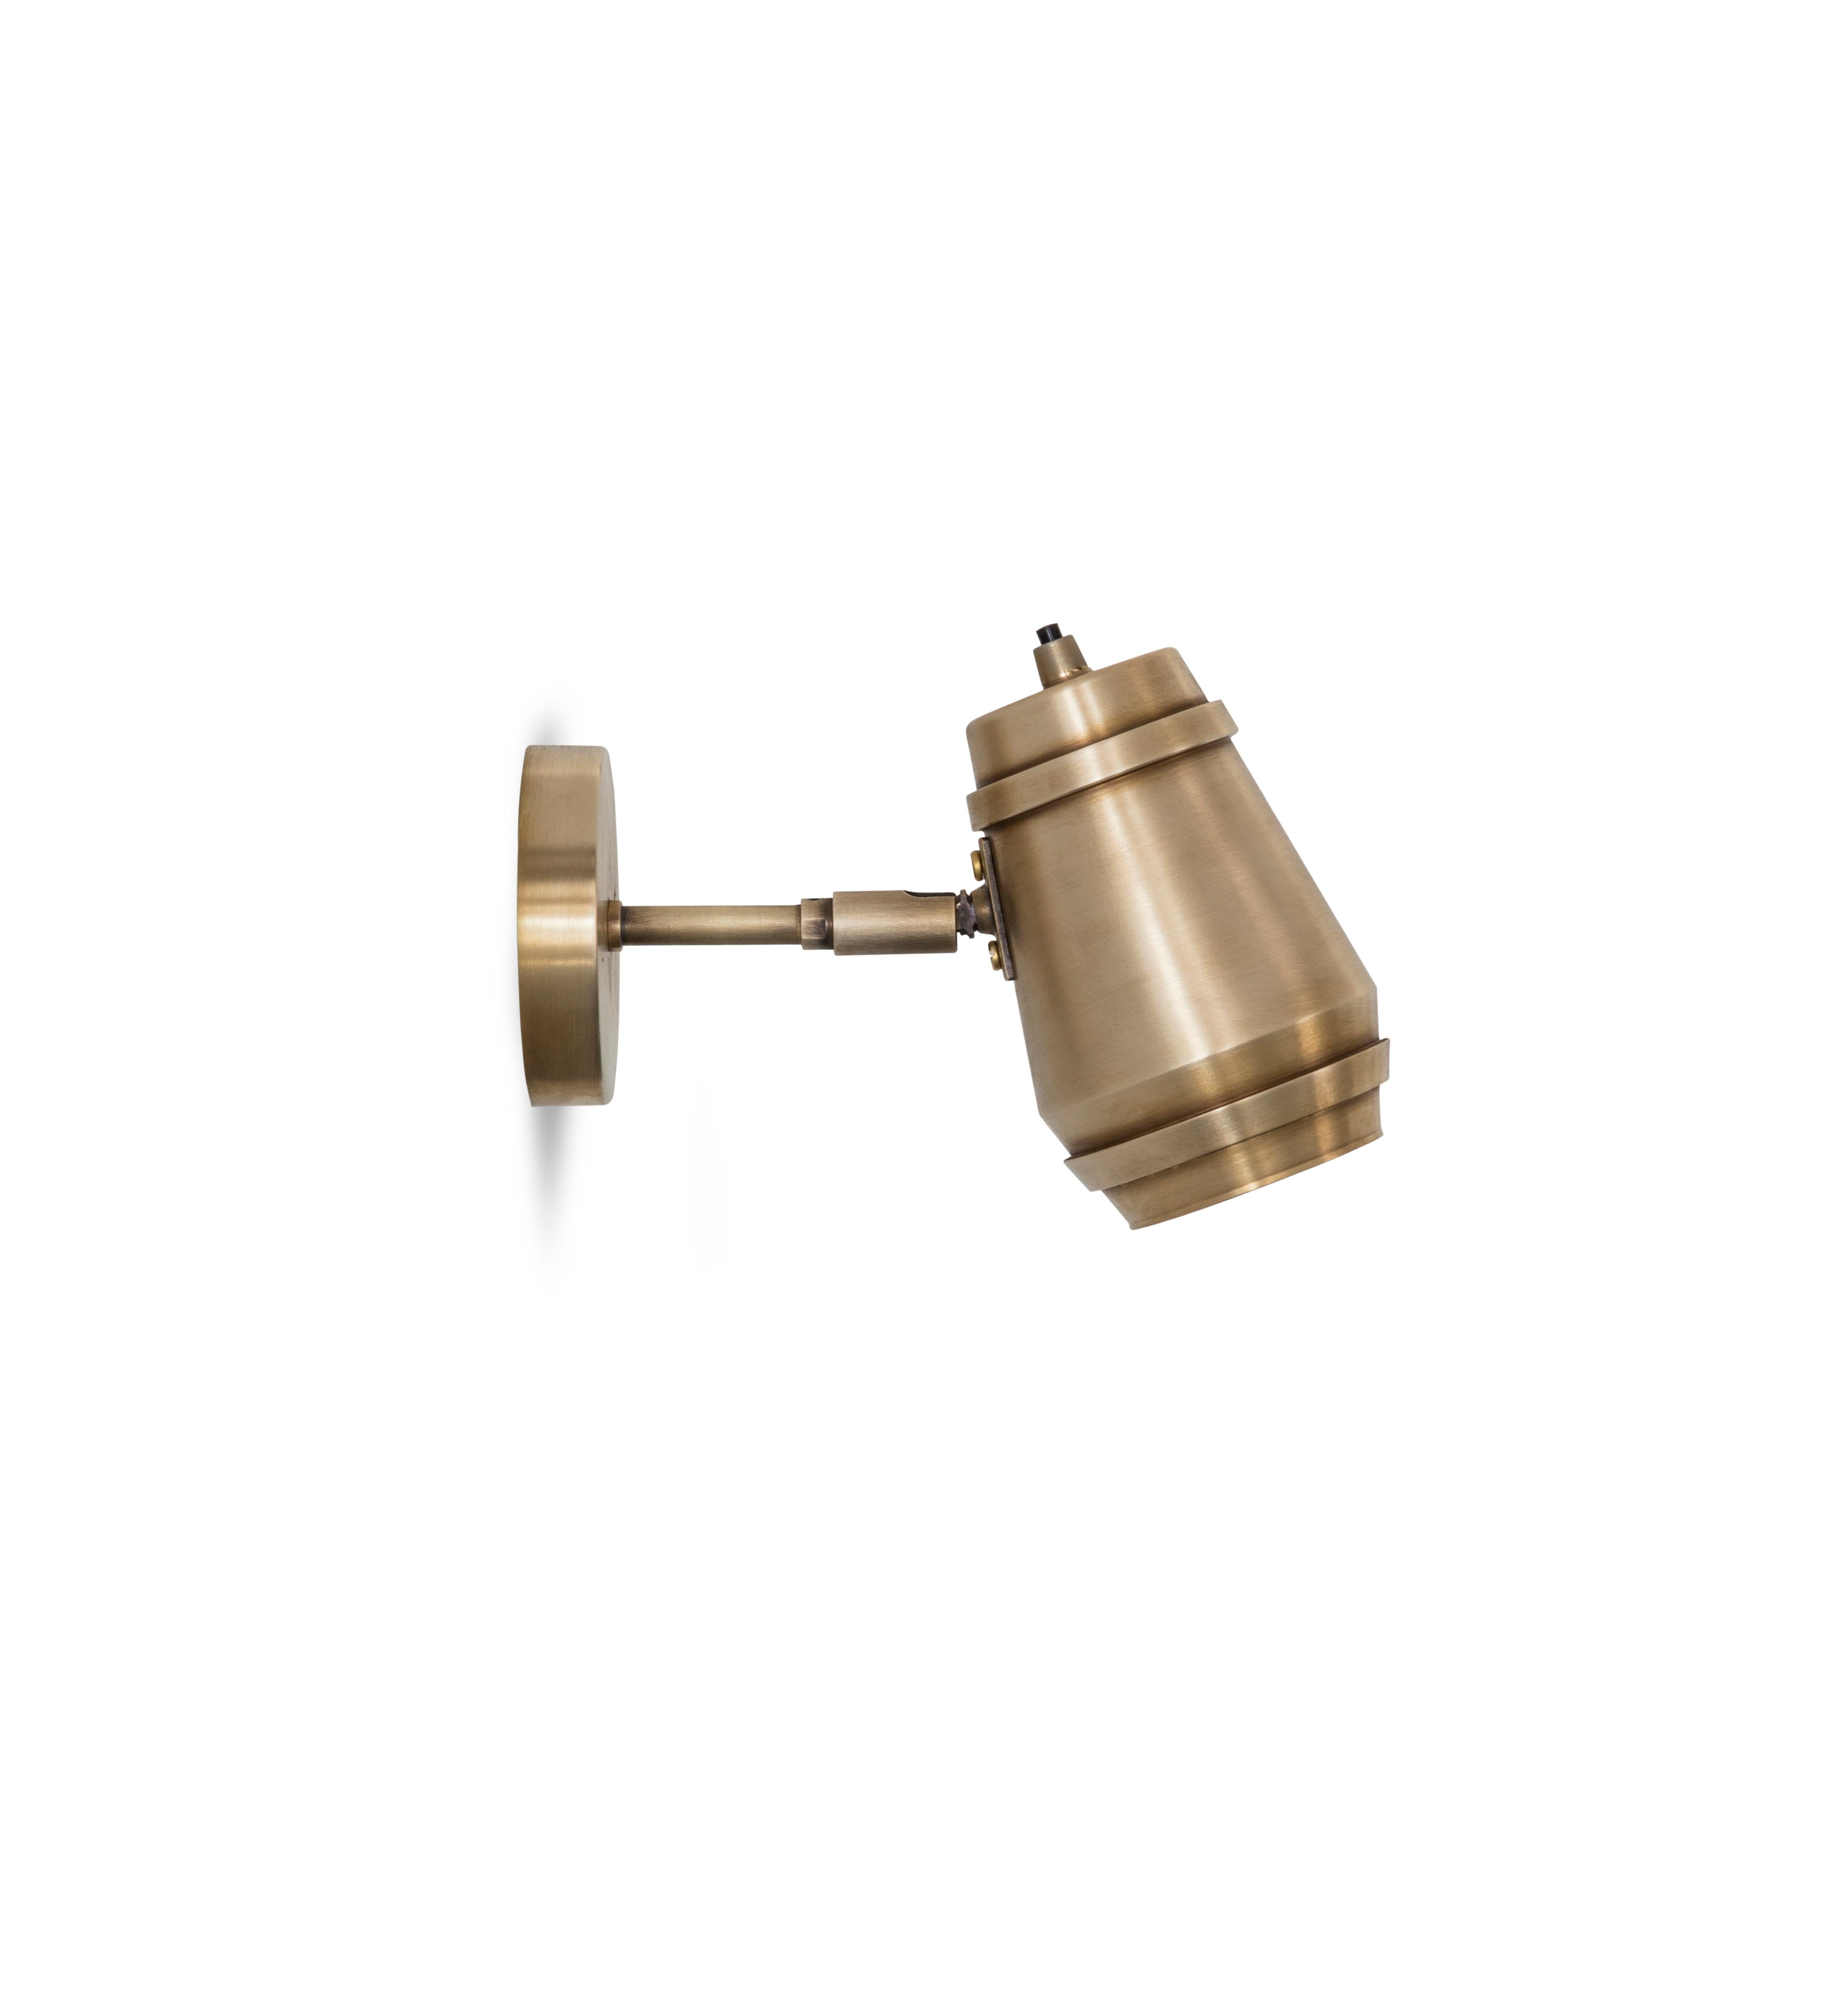 Cask wall Light by Bert Frank
Dimensions: 9 x 22 x 14 cm
Materials: Brass 

Brushed brass lacquered as standard custom finishes available
All our lamps can be wired according to each country. If sold to the USA it will be wired for the USA for